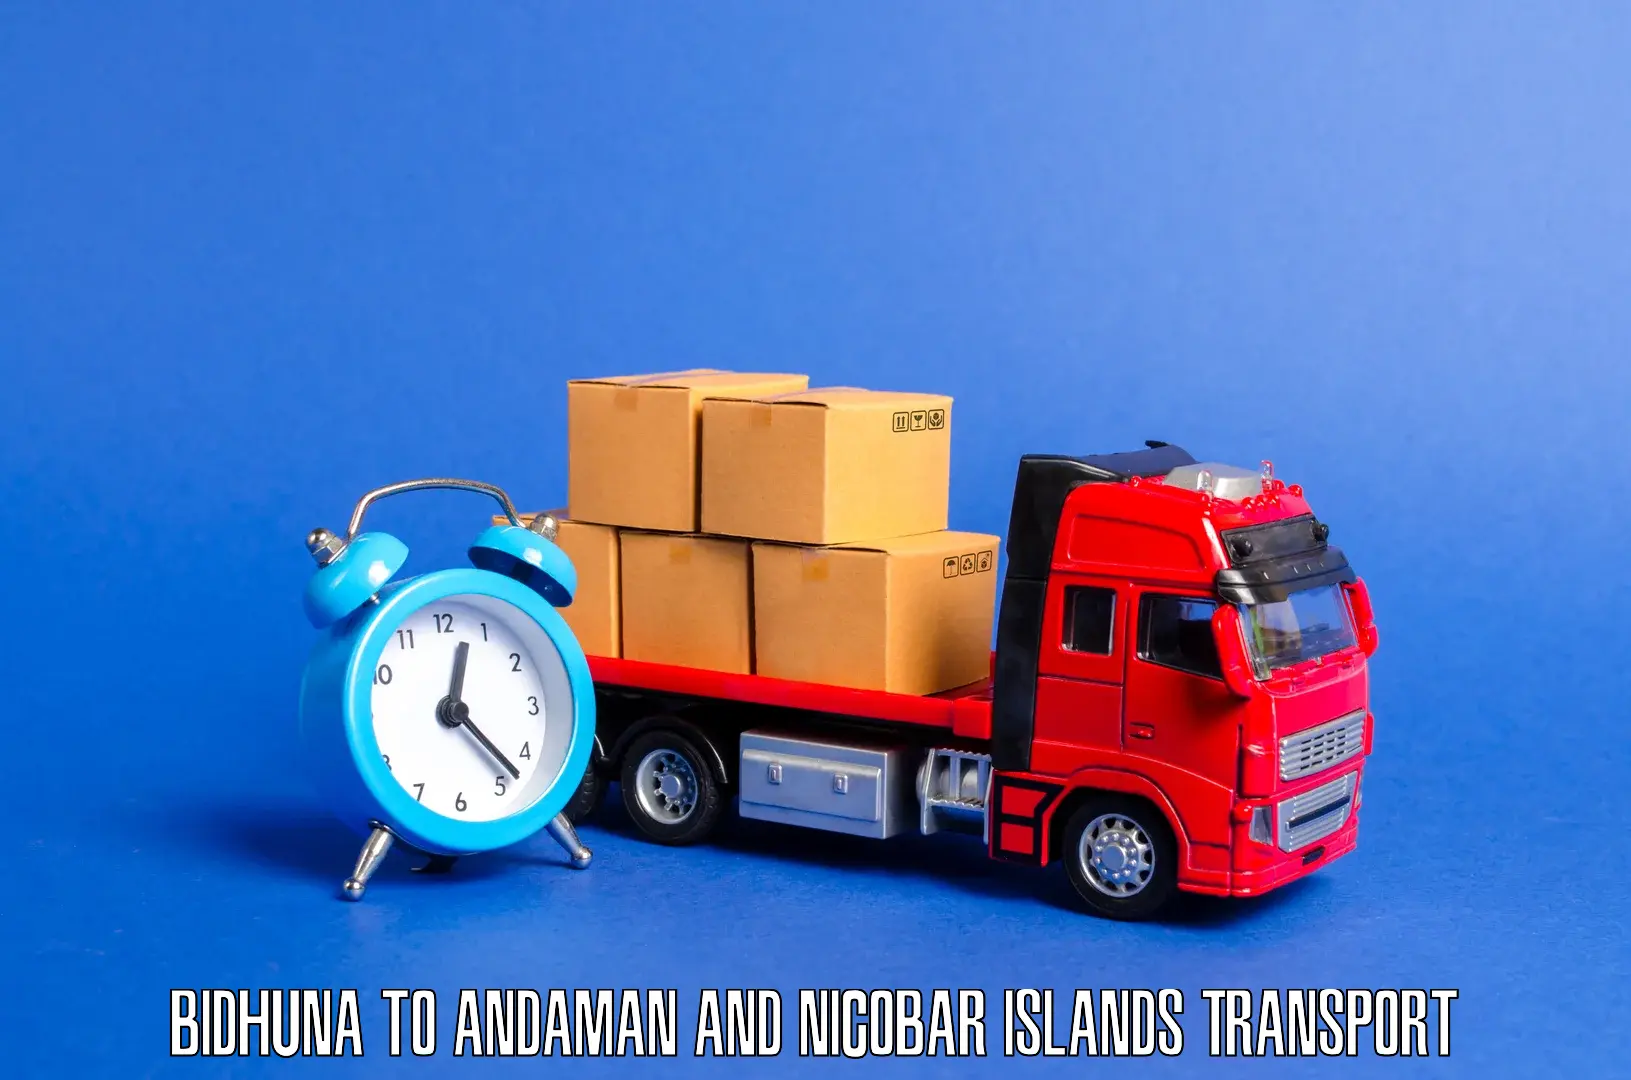 Goods delivery service Bidhuna to Andaman and Nicobar Islands